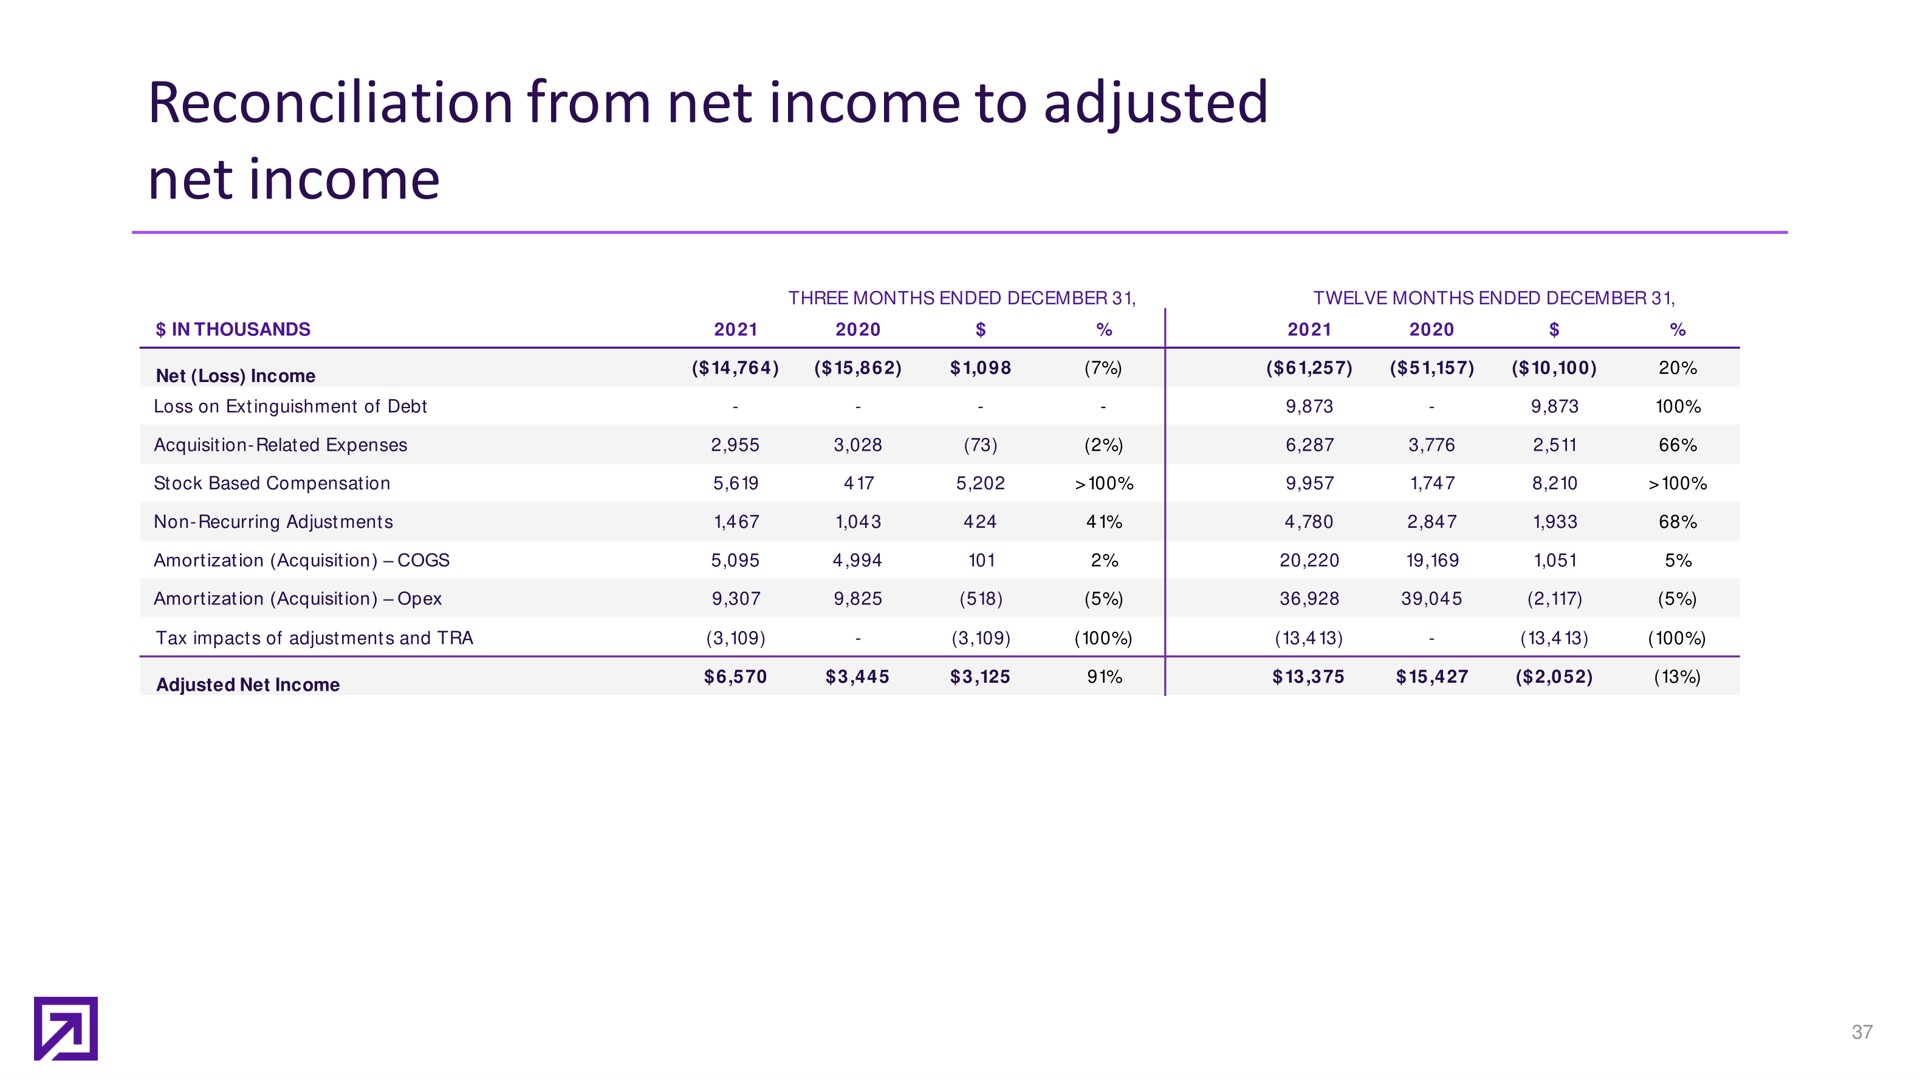 reconciliation from net income to adjusted net income | Definitive Healthcare